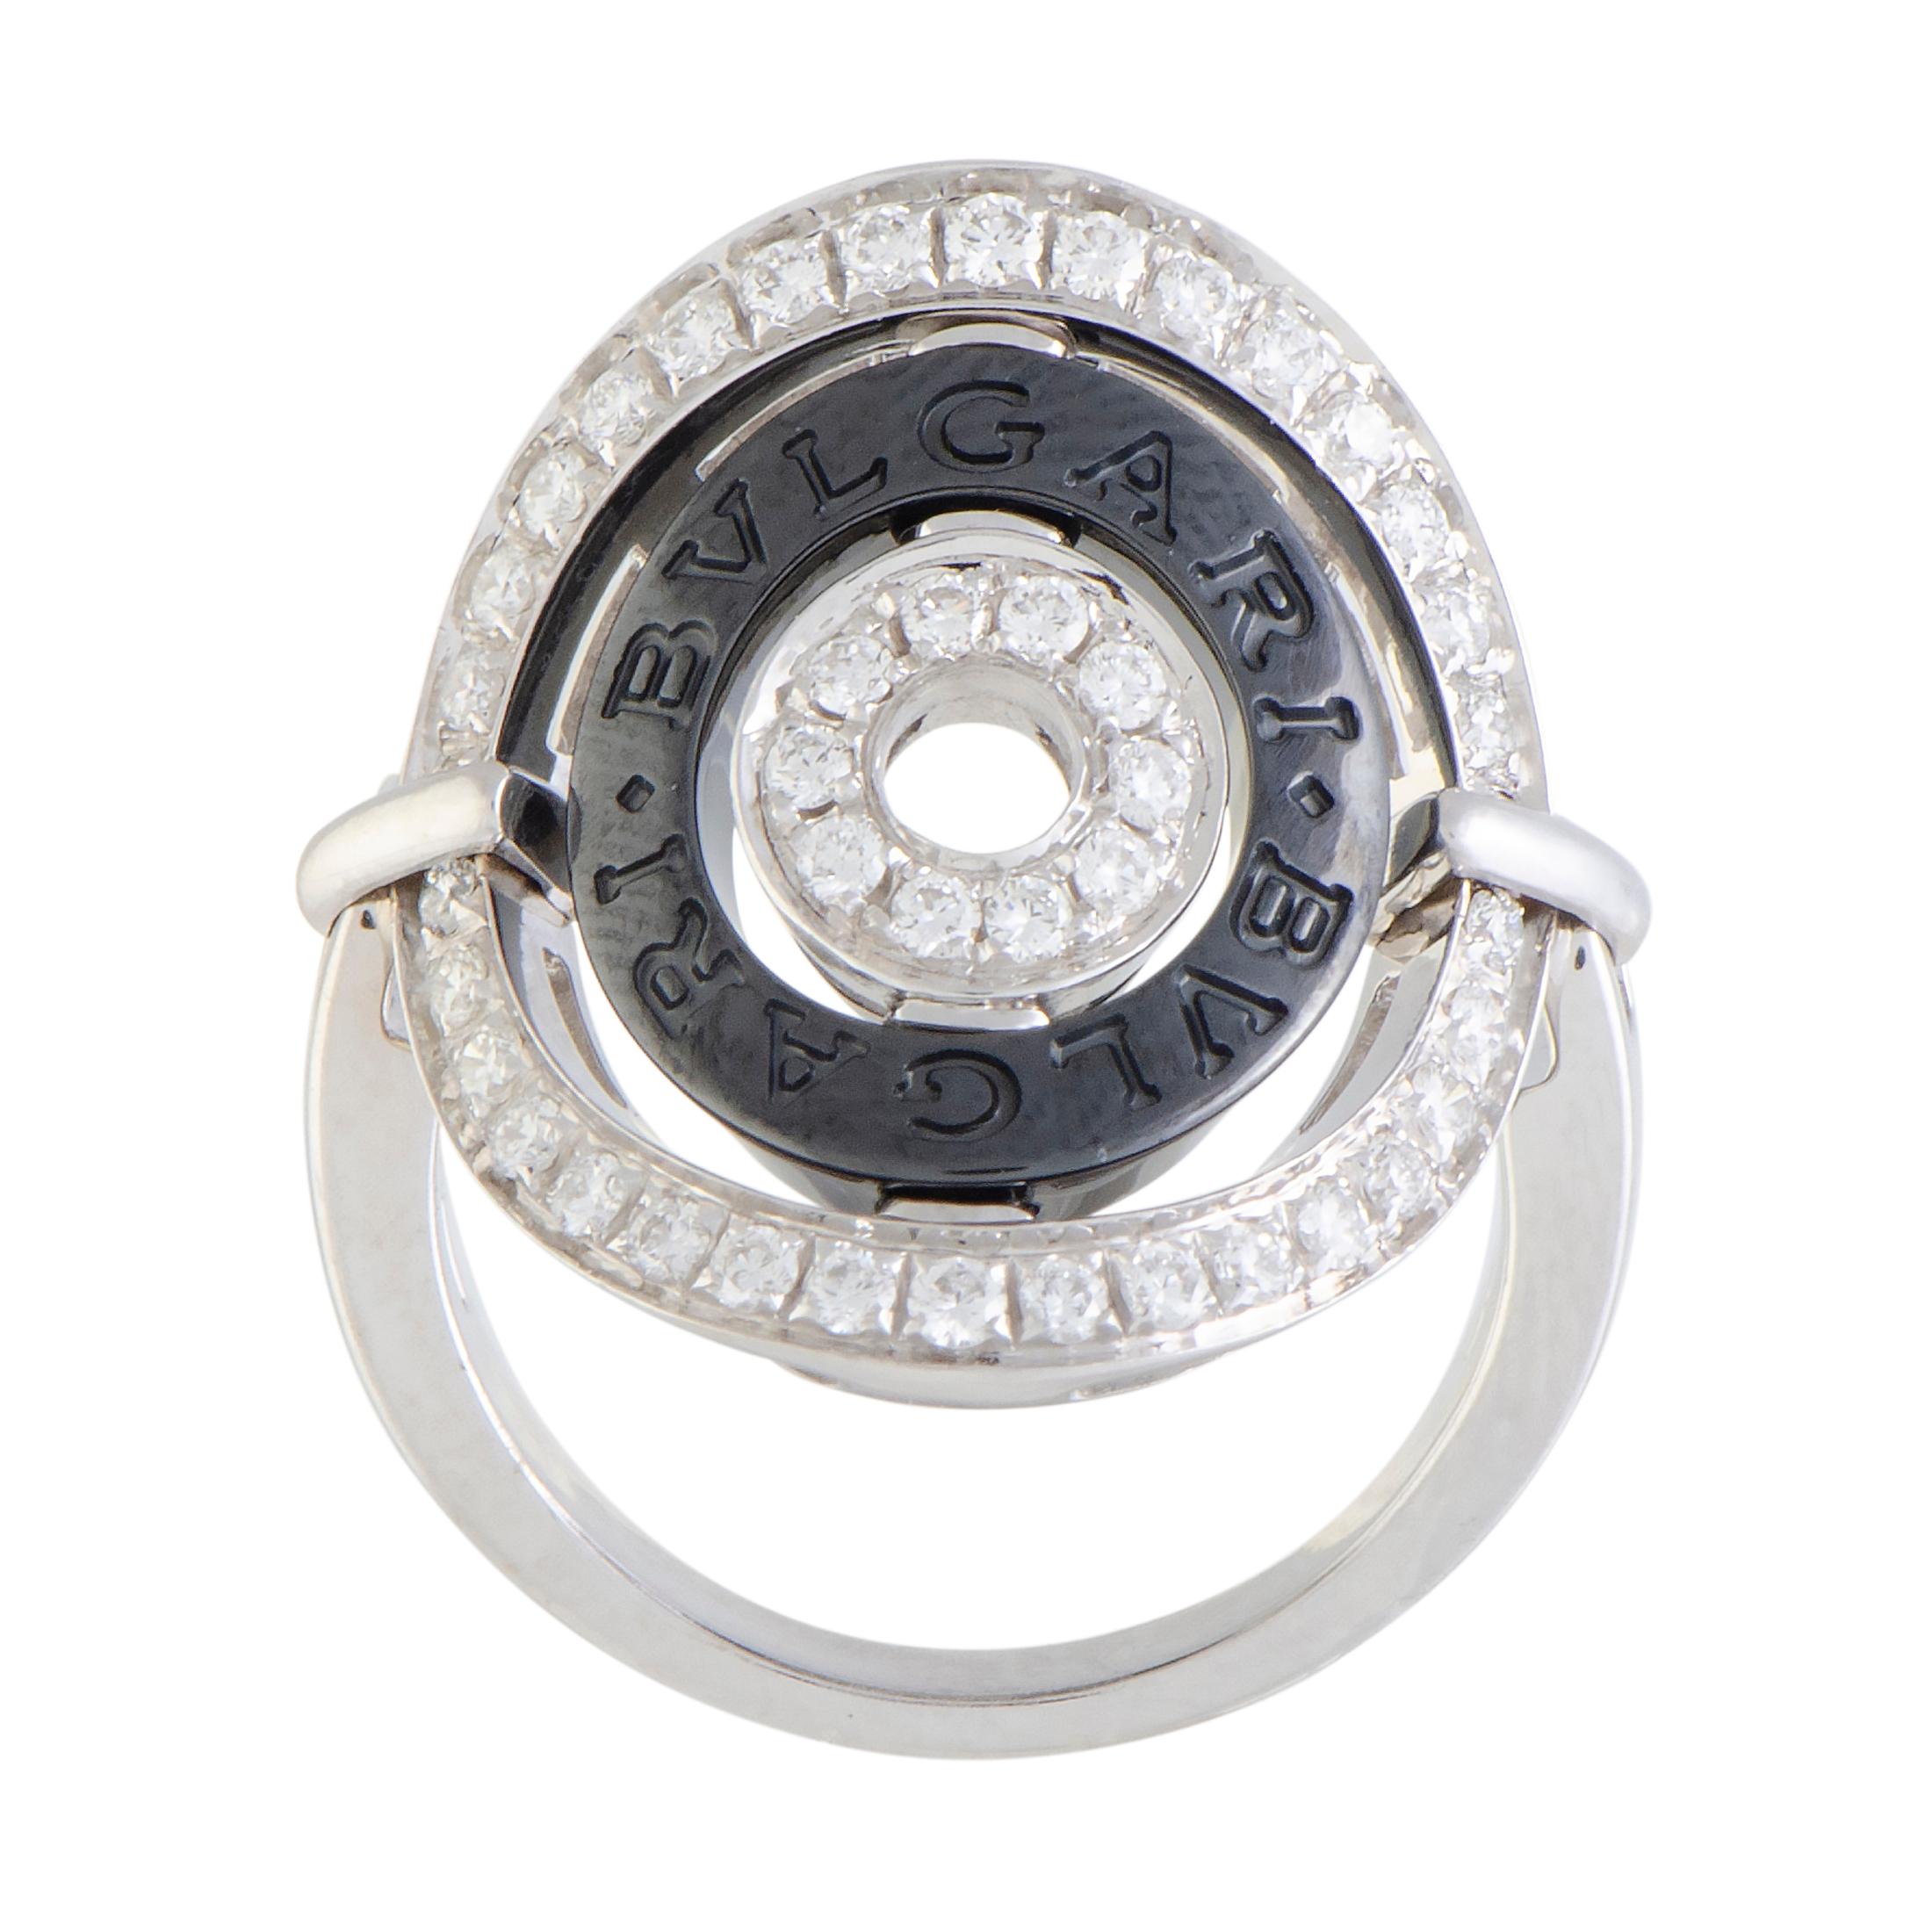 Created for the exceptional “Astrale” collection by Bvlgari, this fabulous statement piece boasts an incredibly offbeat design that is beautifully topped off with lustrous diamonds. The ring is made of prestigious 18K white gold accentuated by a